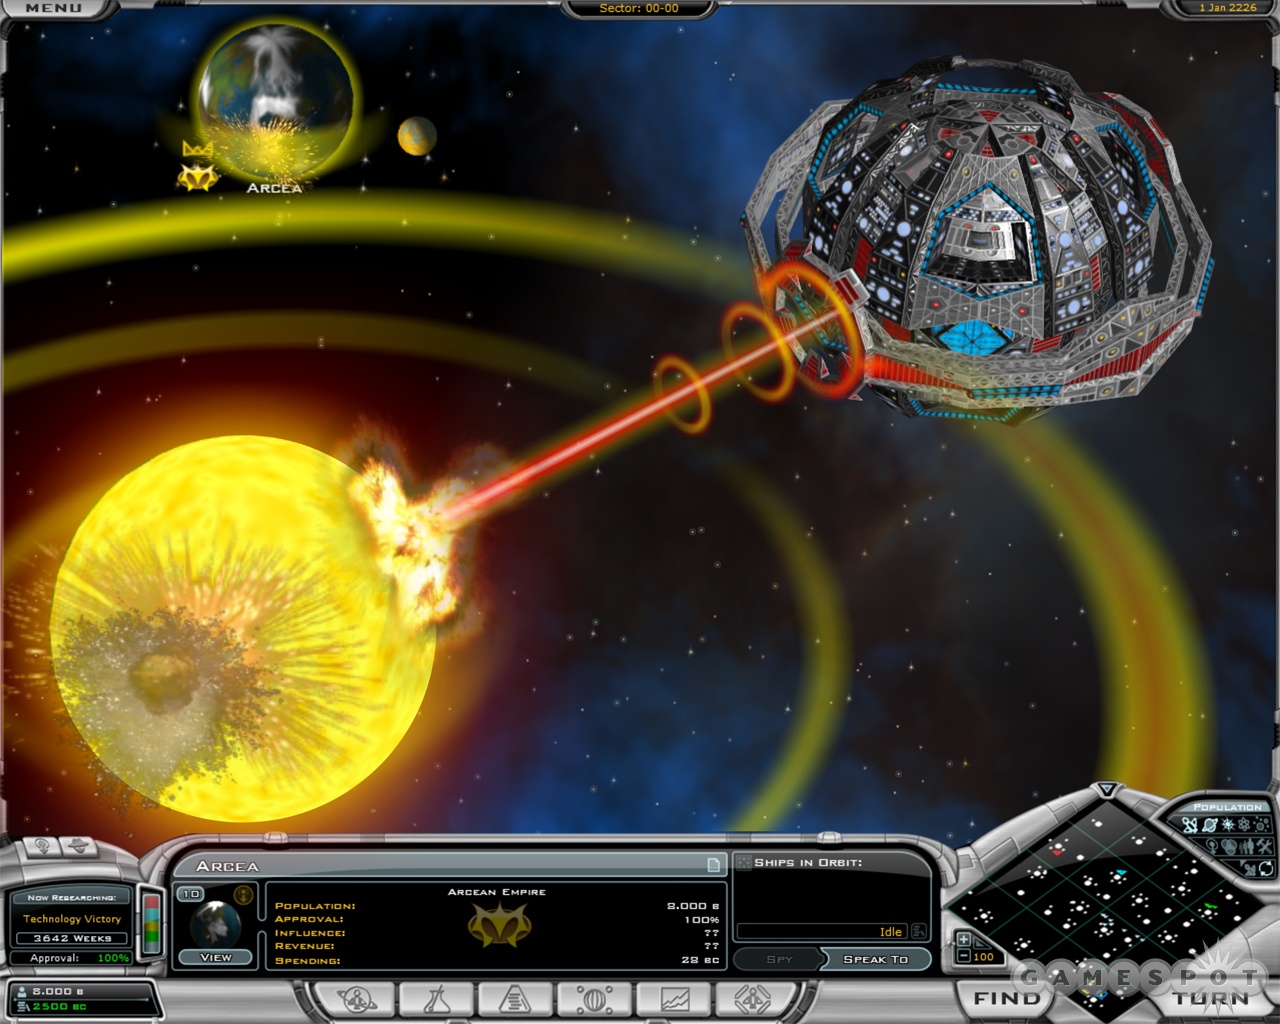 The universe of Galactic Civilizations II is set to expand again later this year.